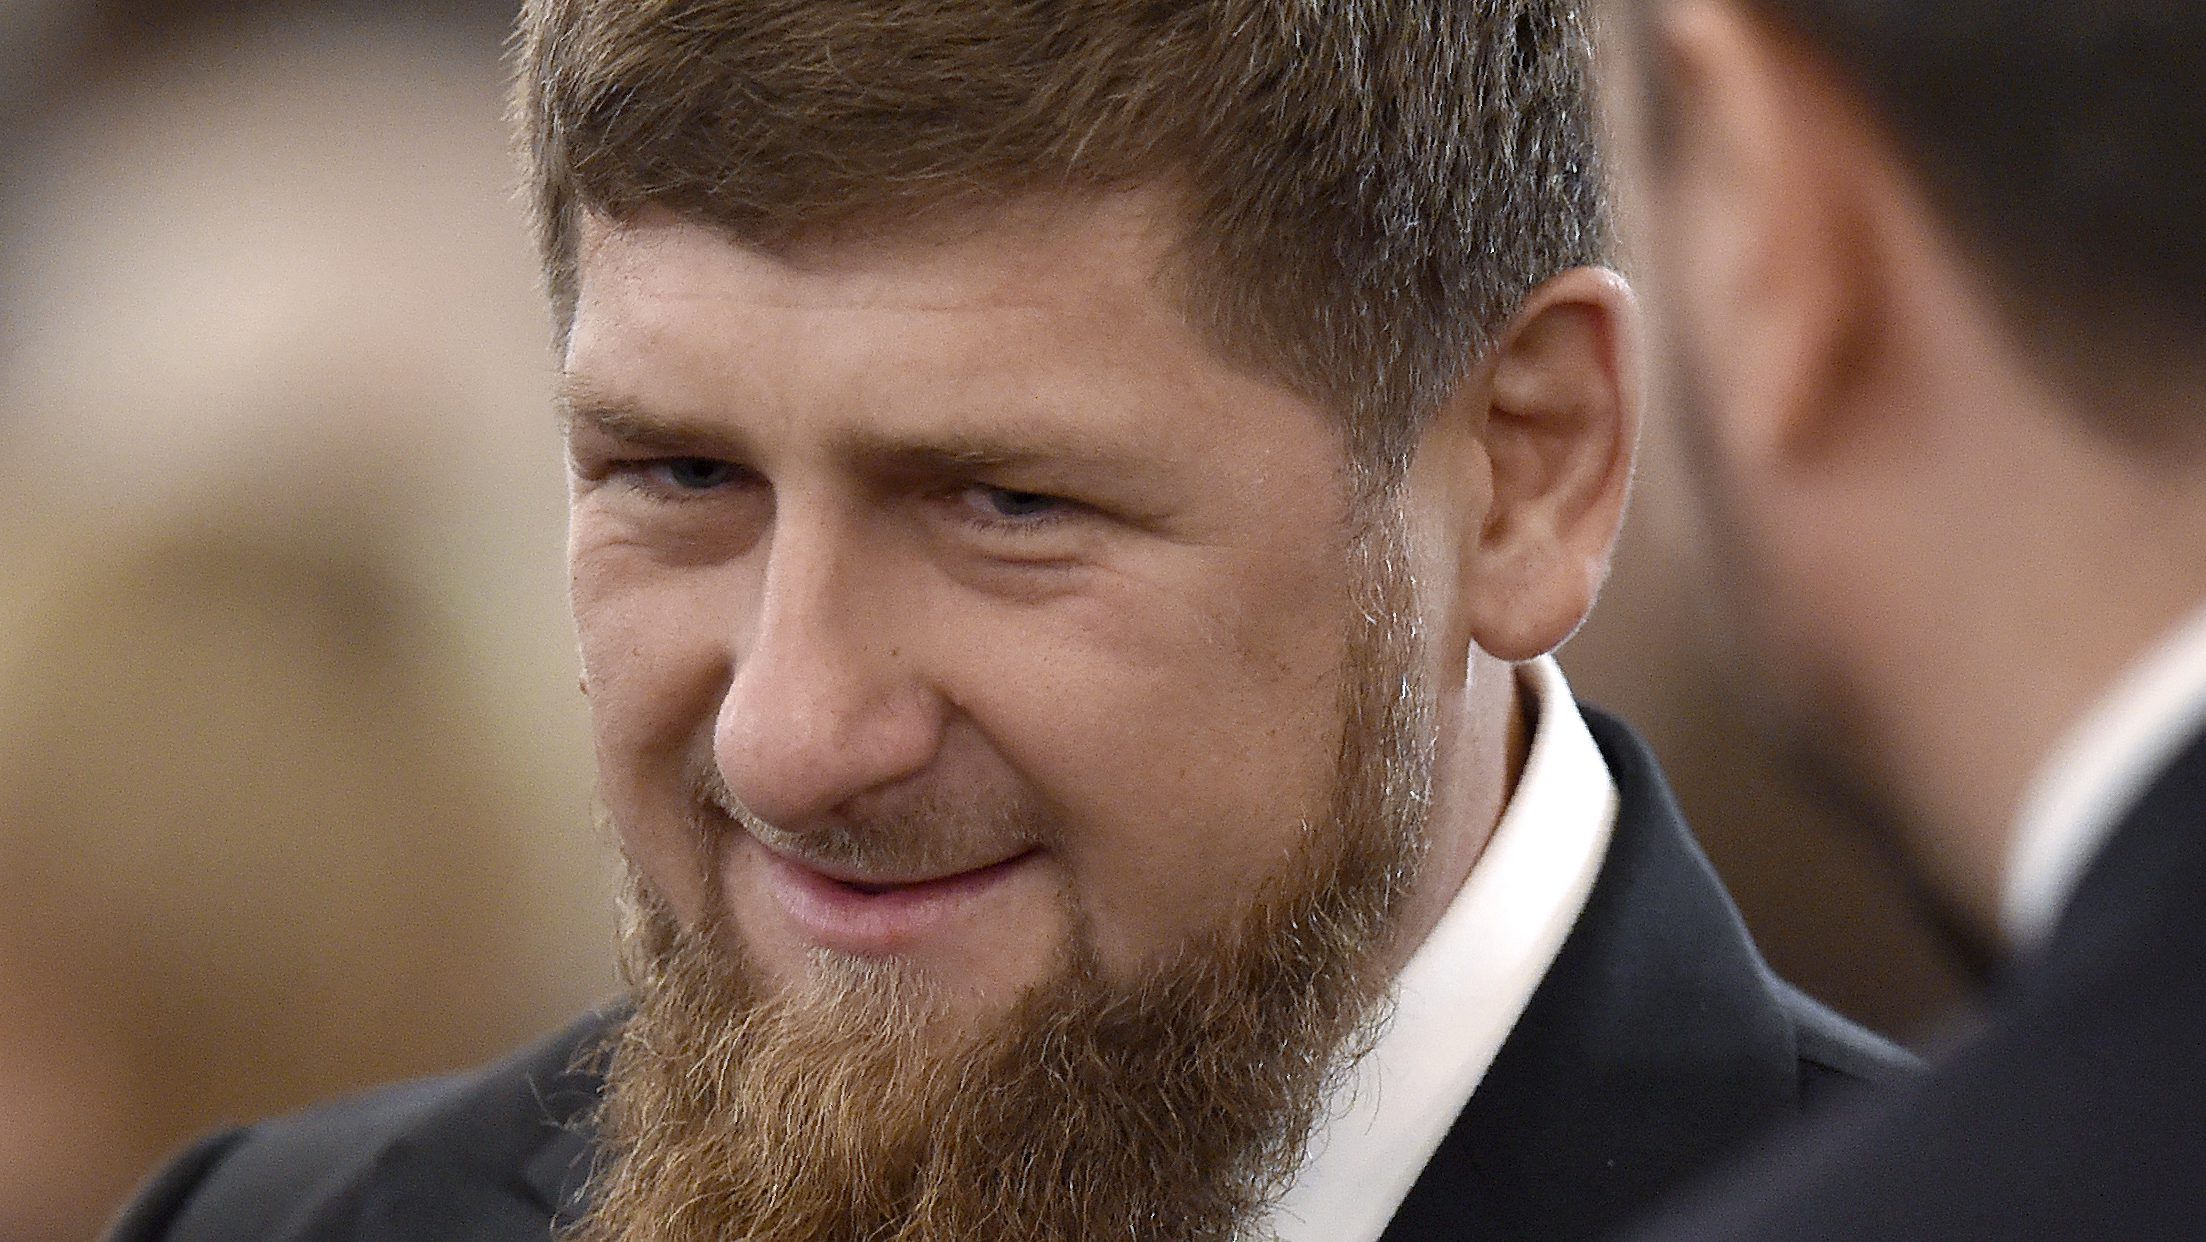 Chechnya Gay Killings And Roundups 5 Fast Facts You Need To Know